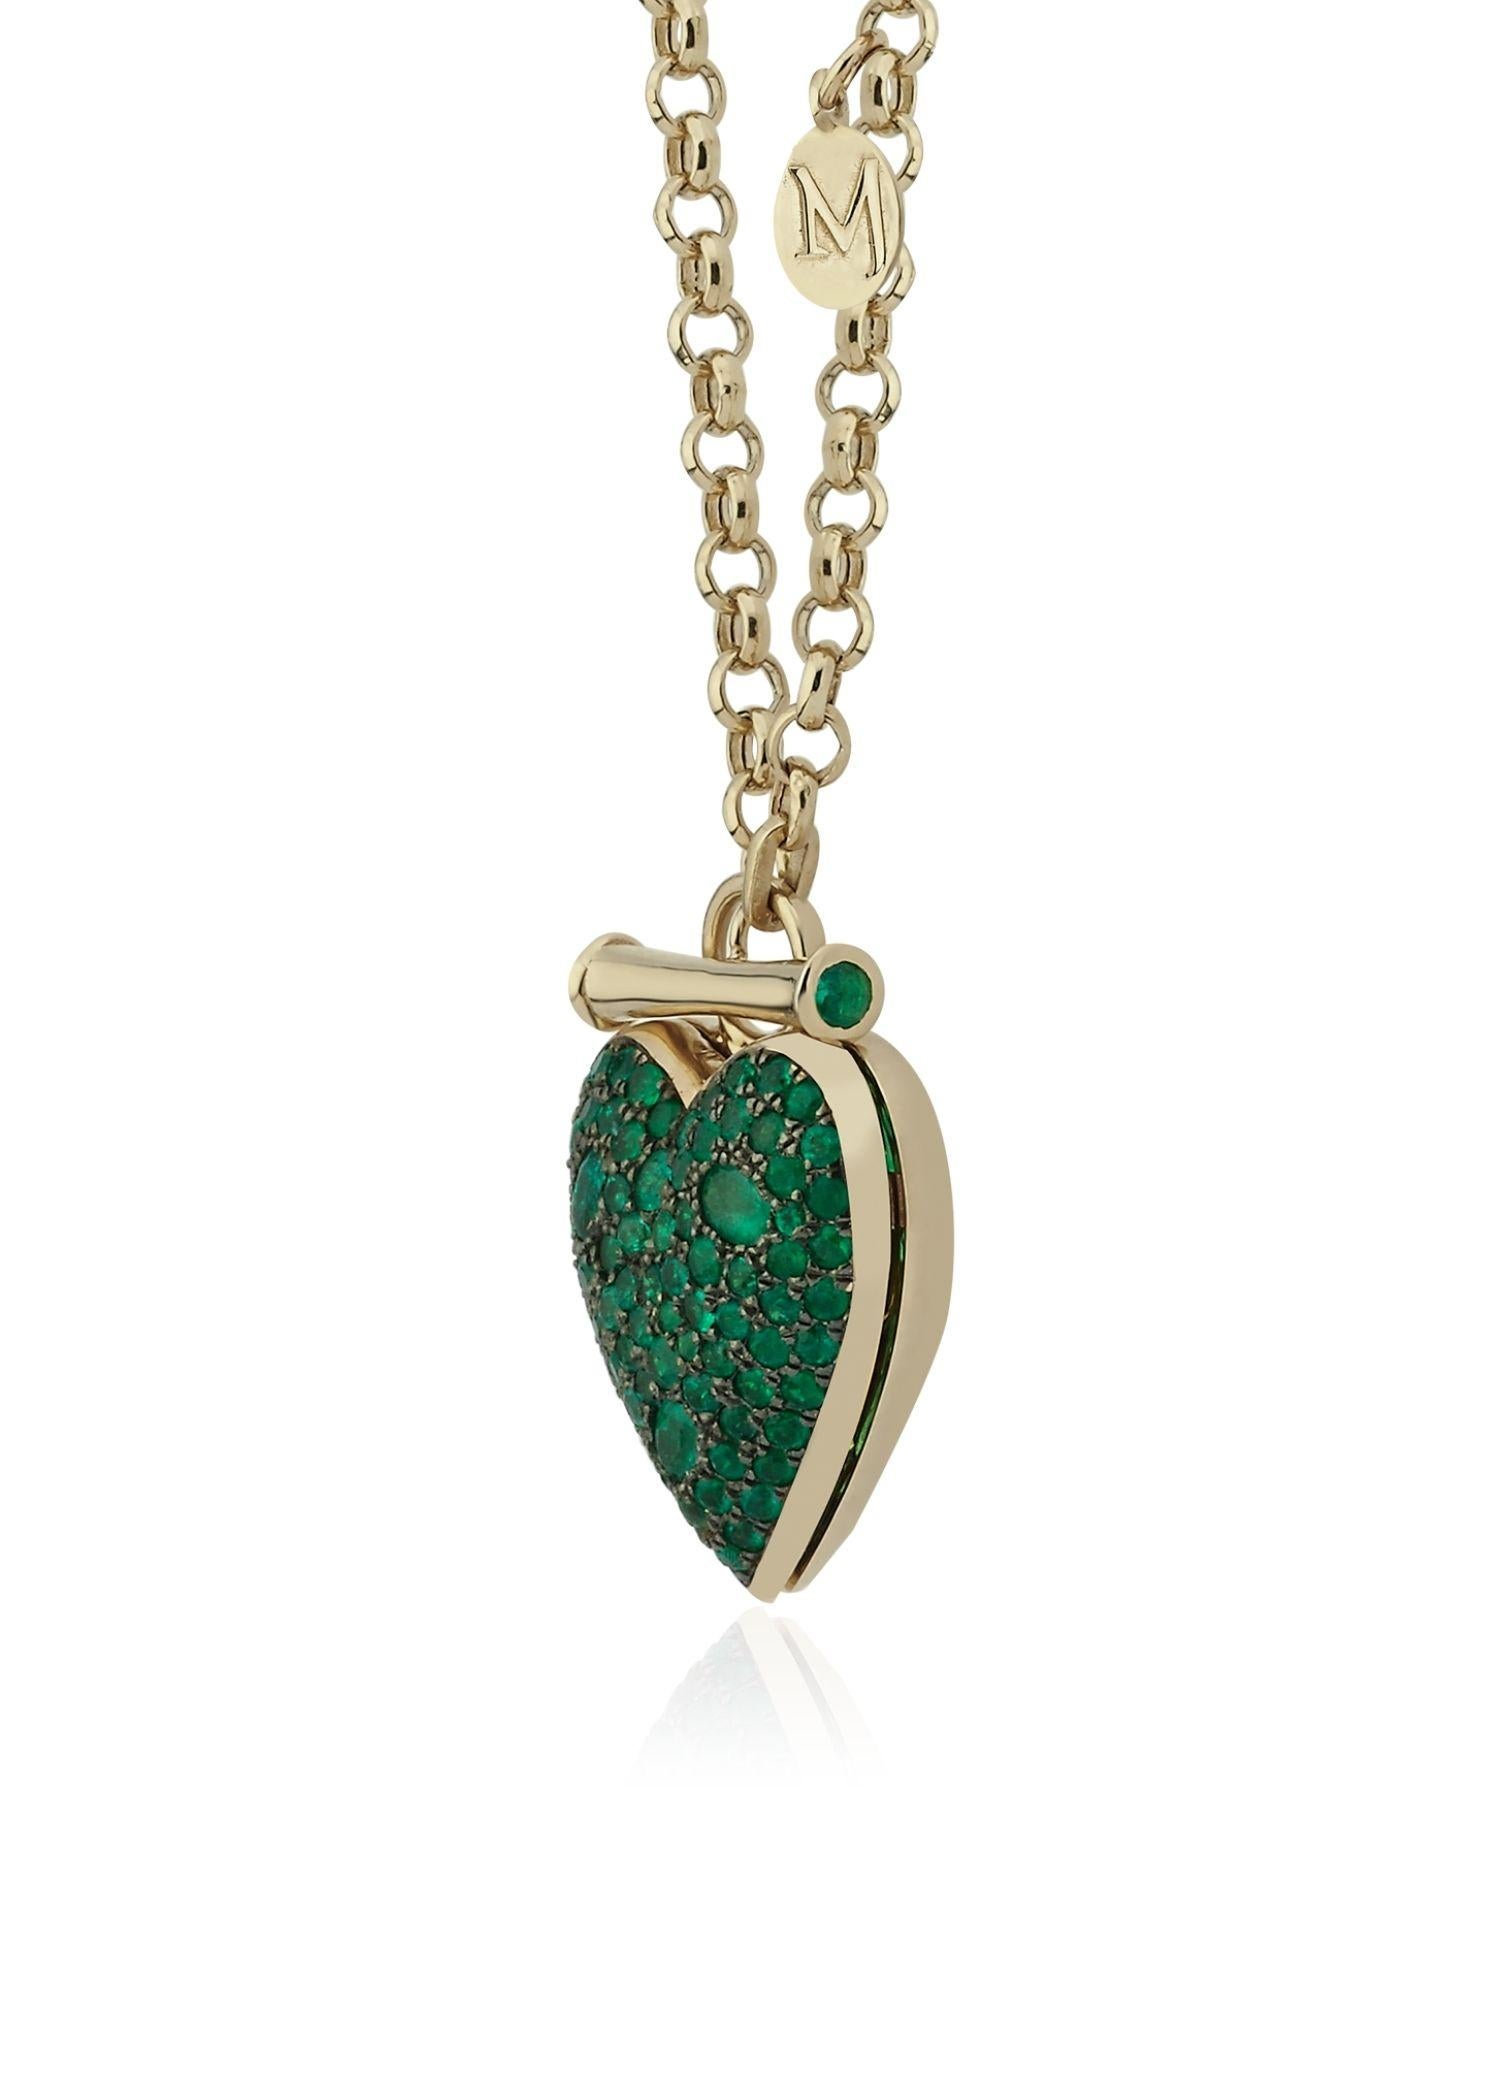 Melie Jewelry Heart Locket Necklace

14K Yellow Gold, 0.77 ct Emerald 
Locket Necklace comes with a gold 50 cm chain.

The Story Behind
Inspired by the phrase 